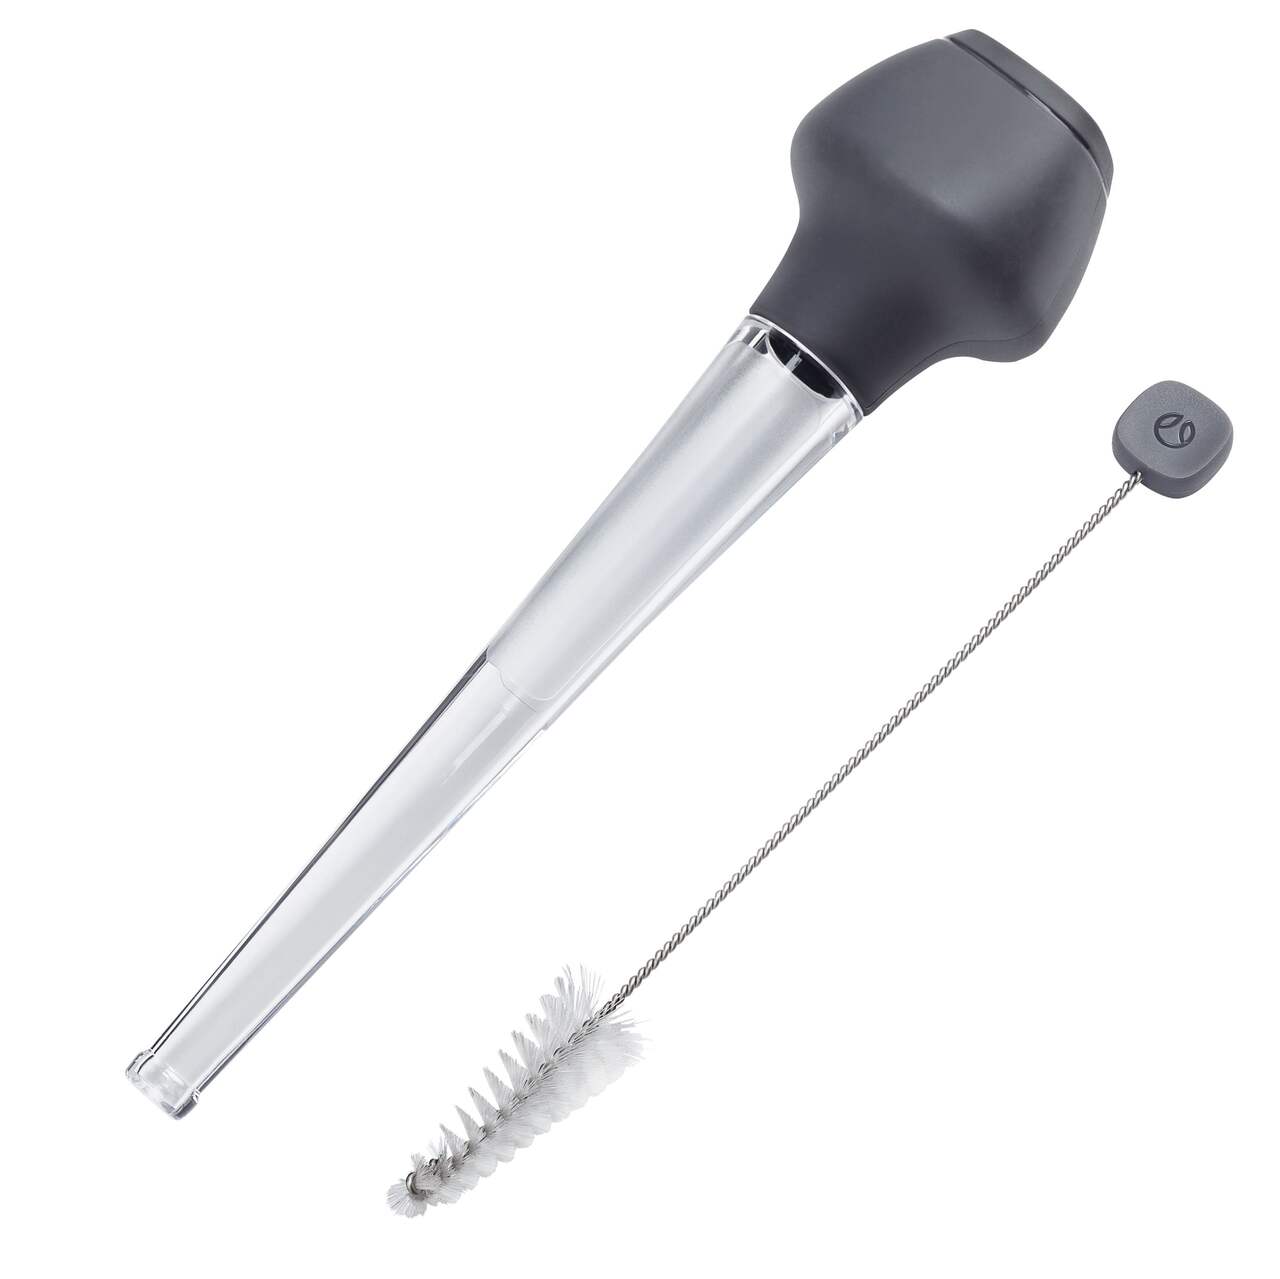 https://media-www.canadiantire.ca/product/living/kitchen/kitchen-tools-thermometers/1422279/paderno-baster-9fda260d-caa0-46d5-a728-8c231ace71c8-jpgrendition.jpg?imdensity=1&imwidth=640&impolicy=mZoom